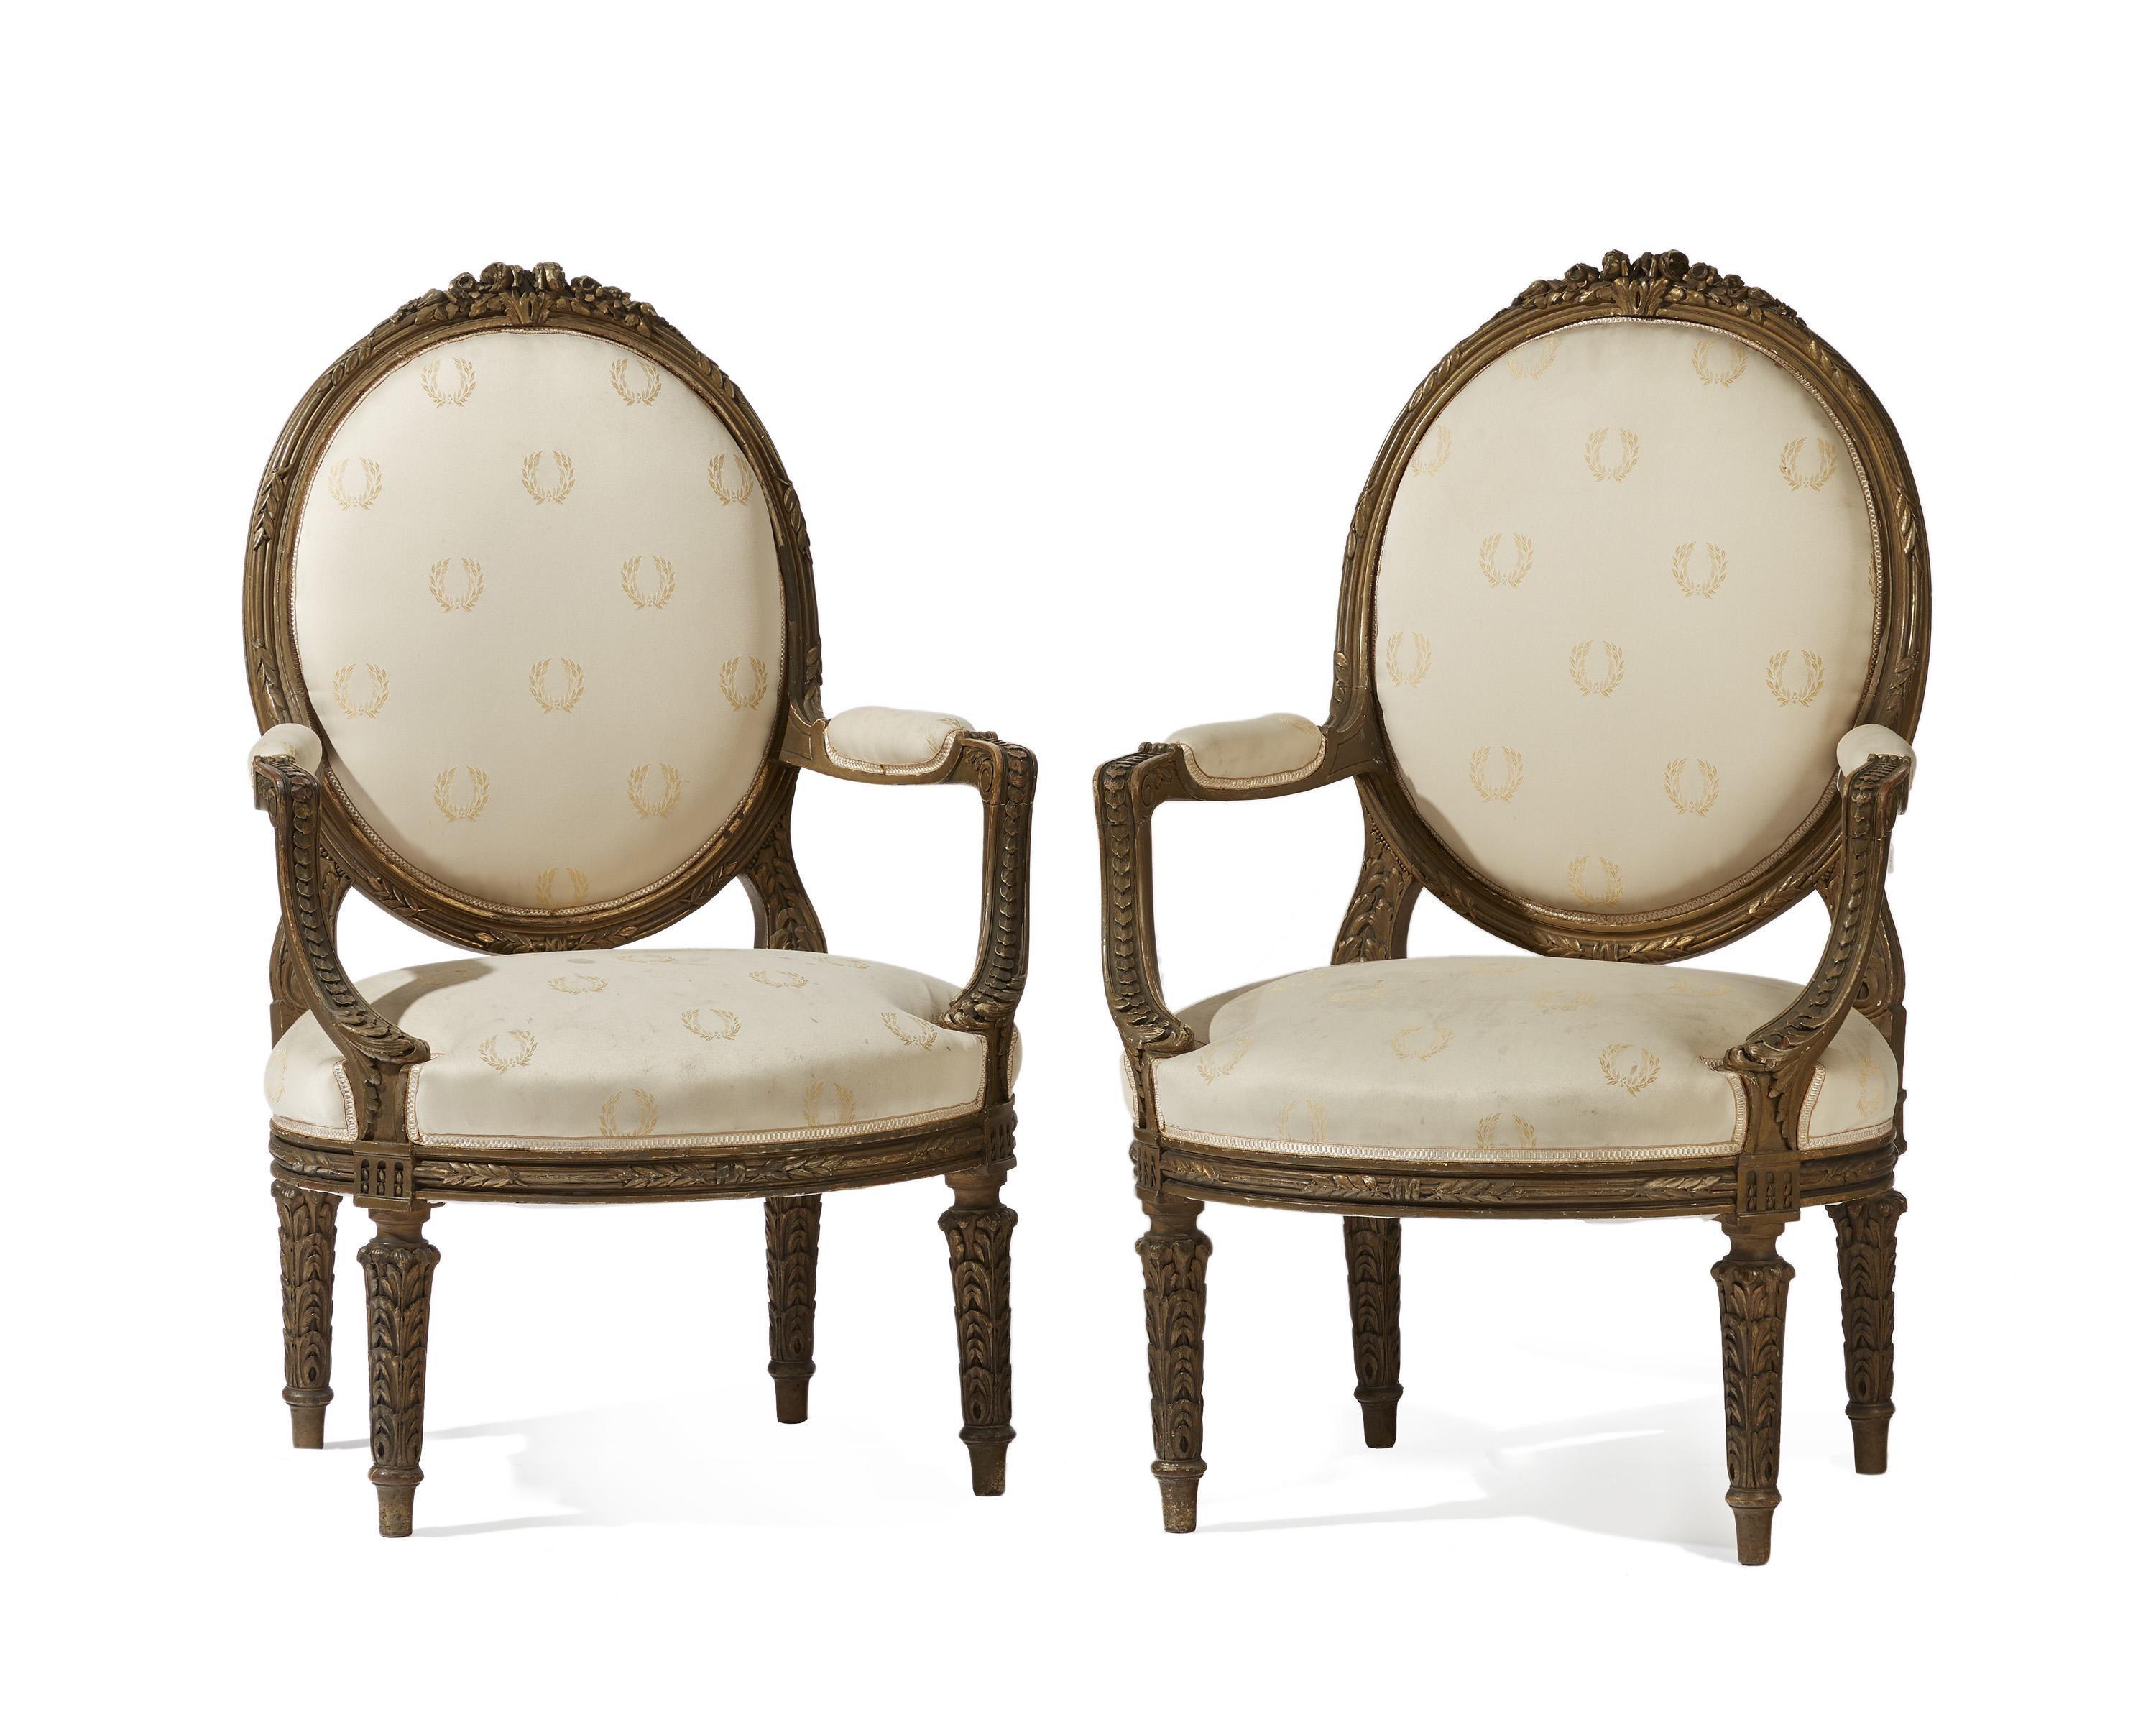 Louis XVI Pair of French Giltwood Armchairs, 19th Century